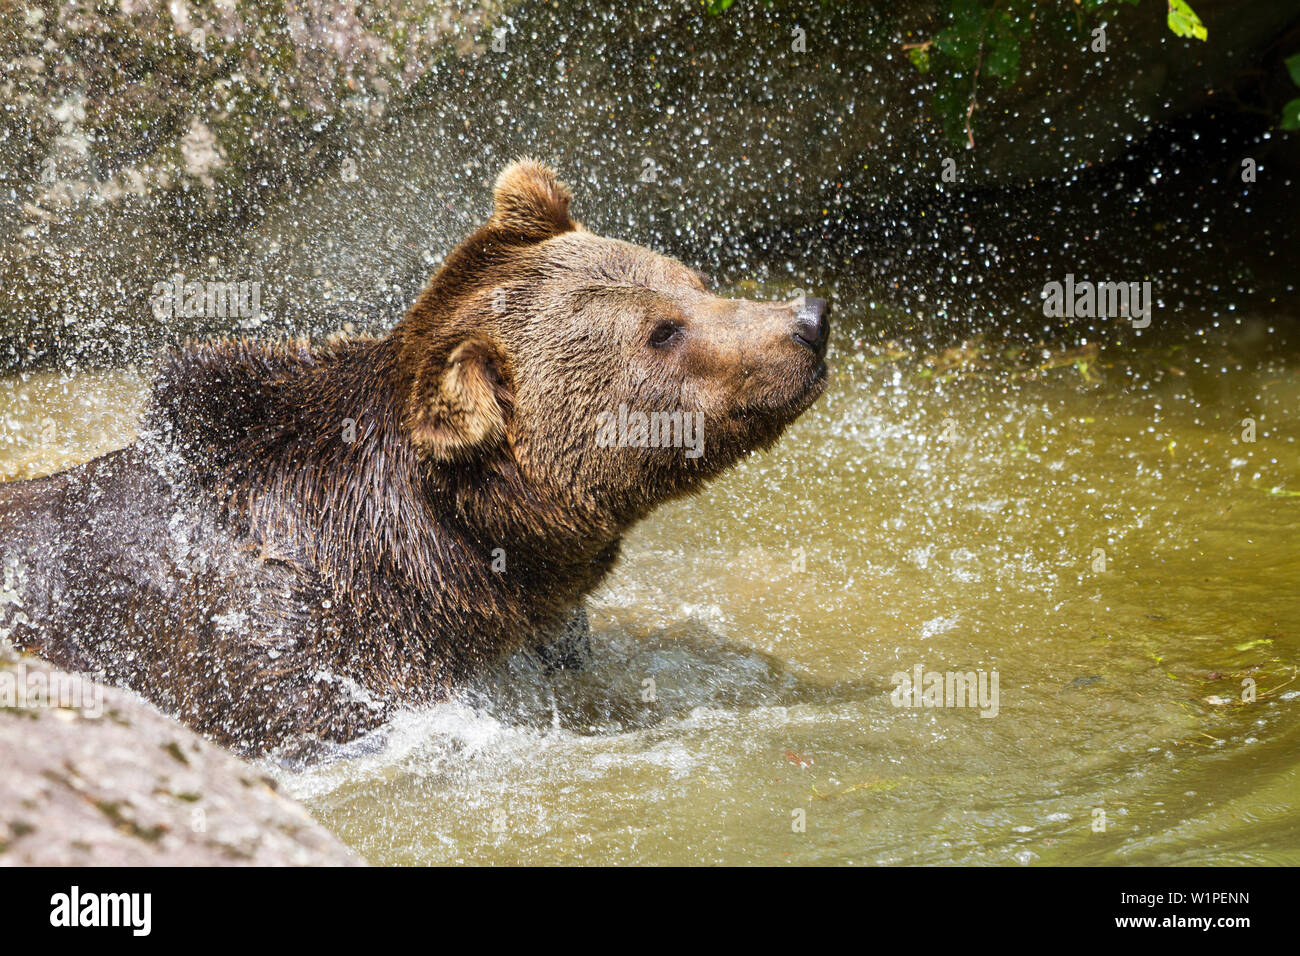 Brown Bear in water shaking, Ursus arctos, Bavarian Forest National Park, Bavaria, Germany, Europe, captive Stock Photo